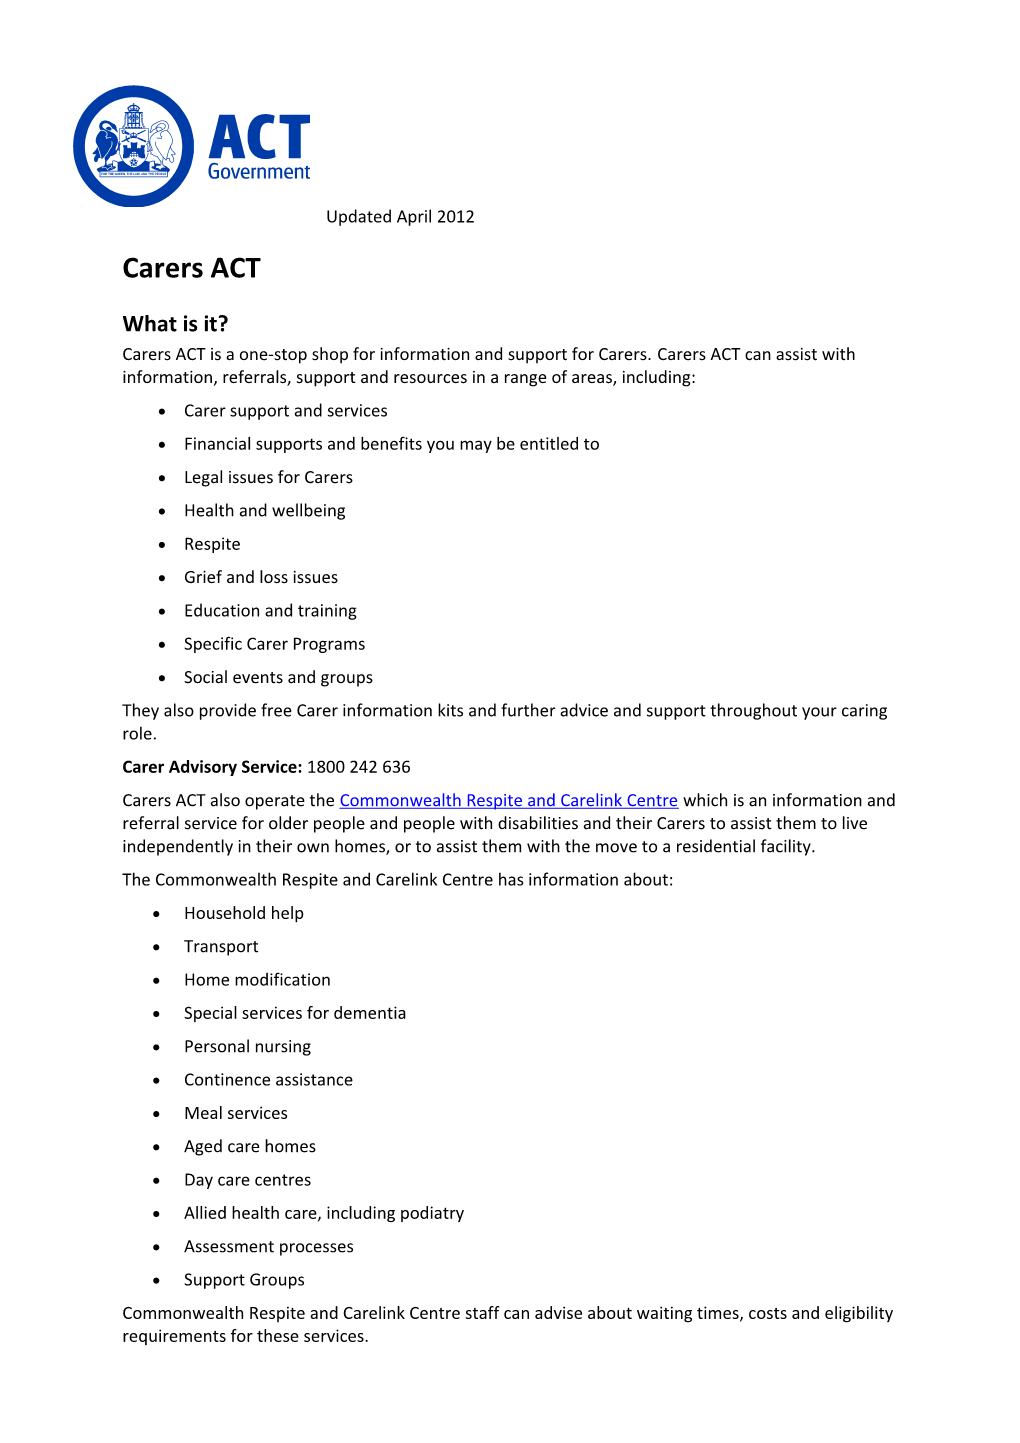 Carers ACT Is a One-Stop Shop for Information and Support for Carers. Carers ACT Can Assist